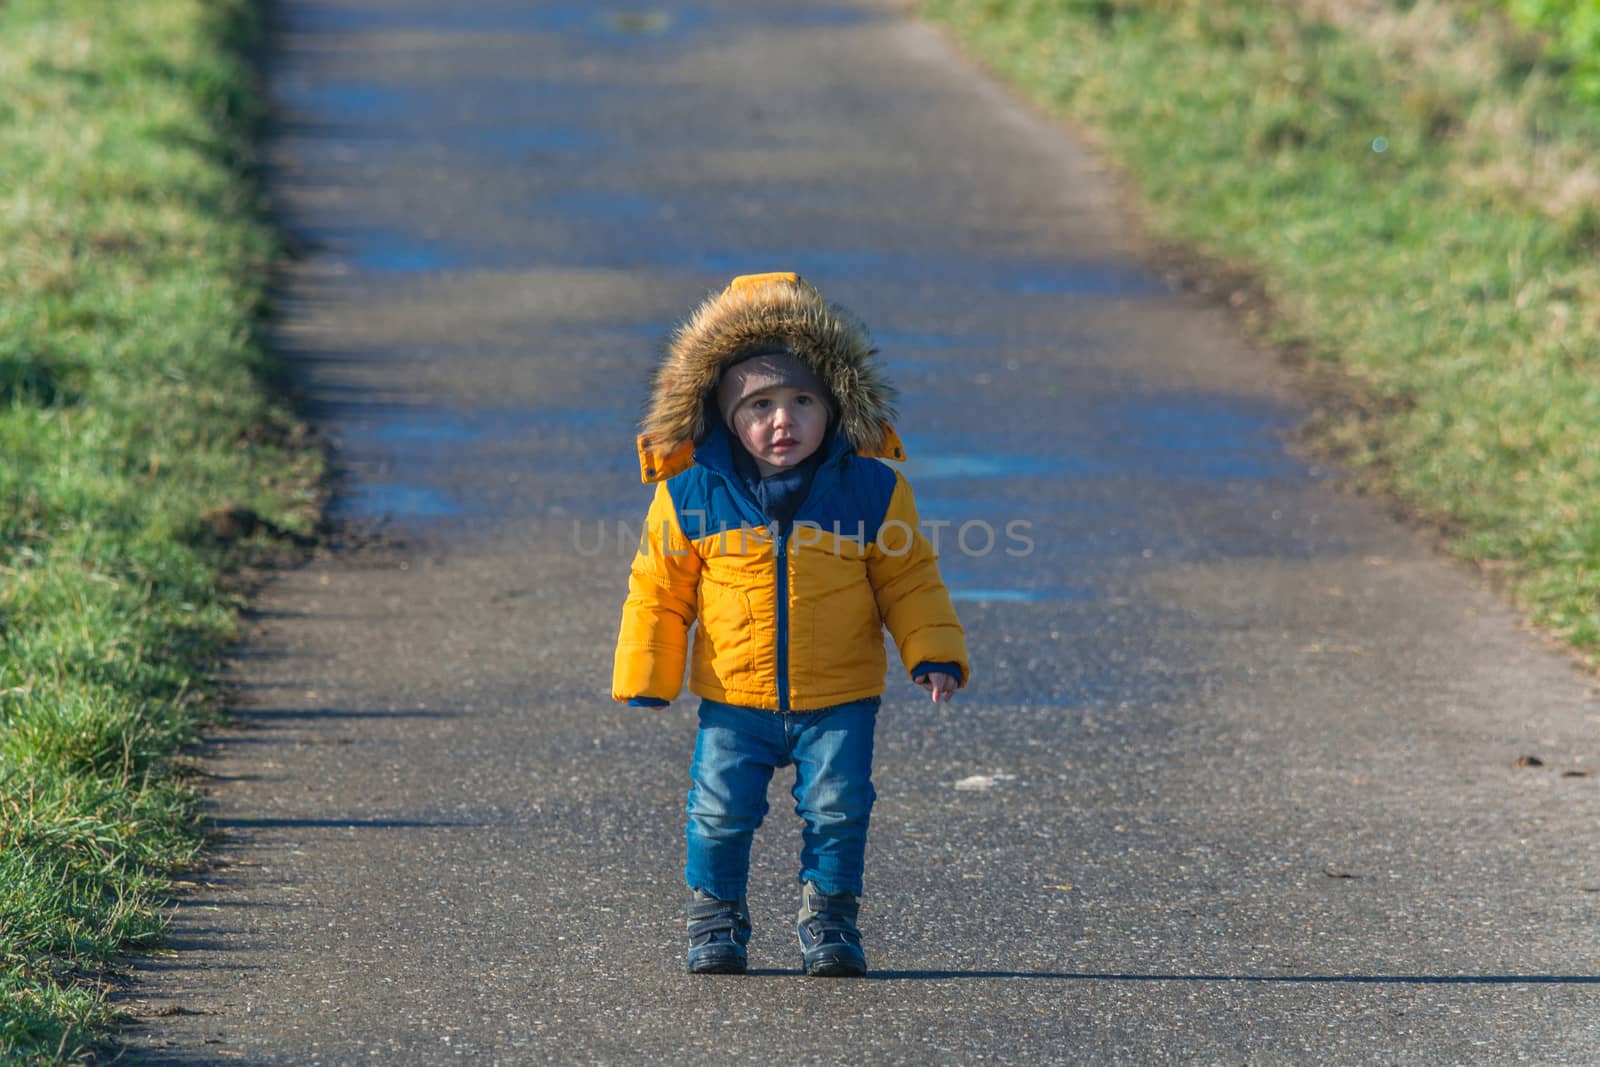 Little boy is laughing and walking on a country road.